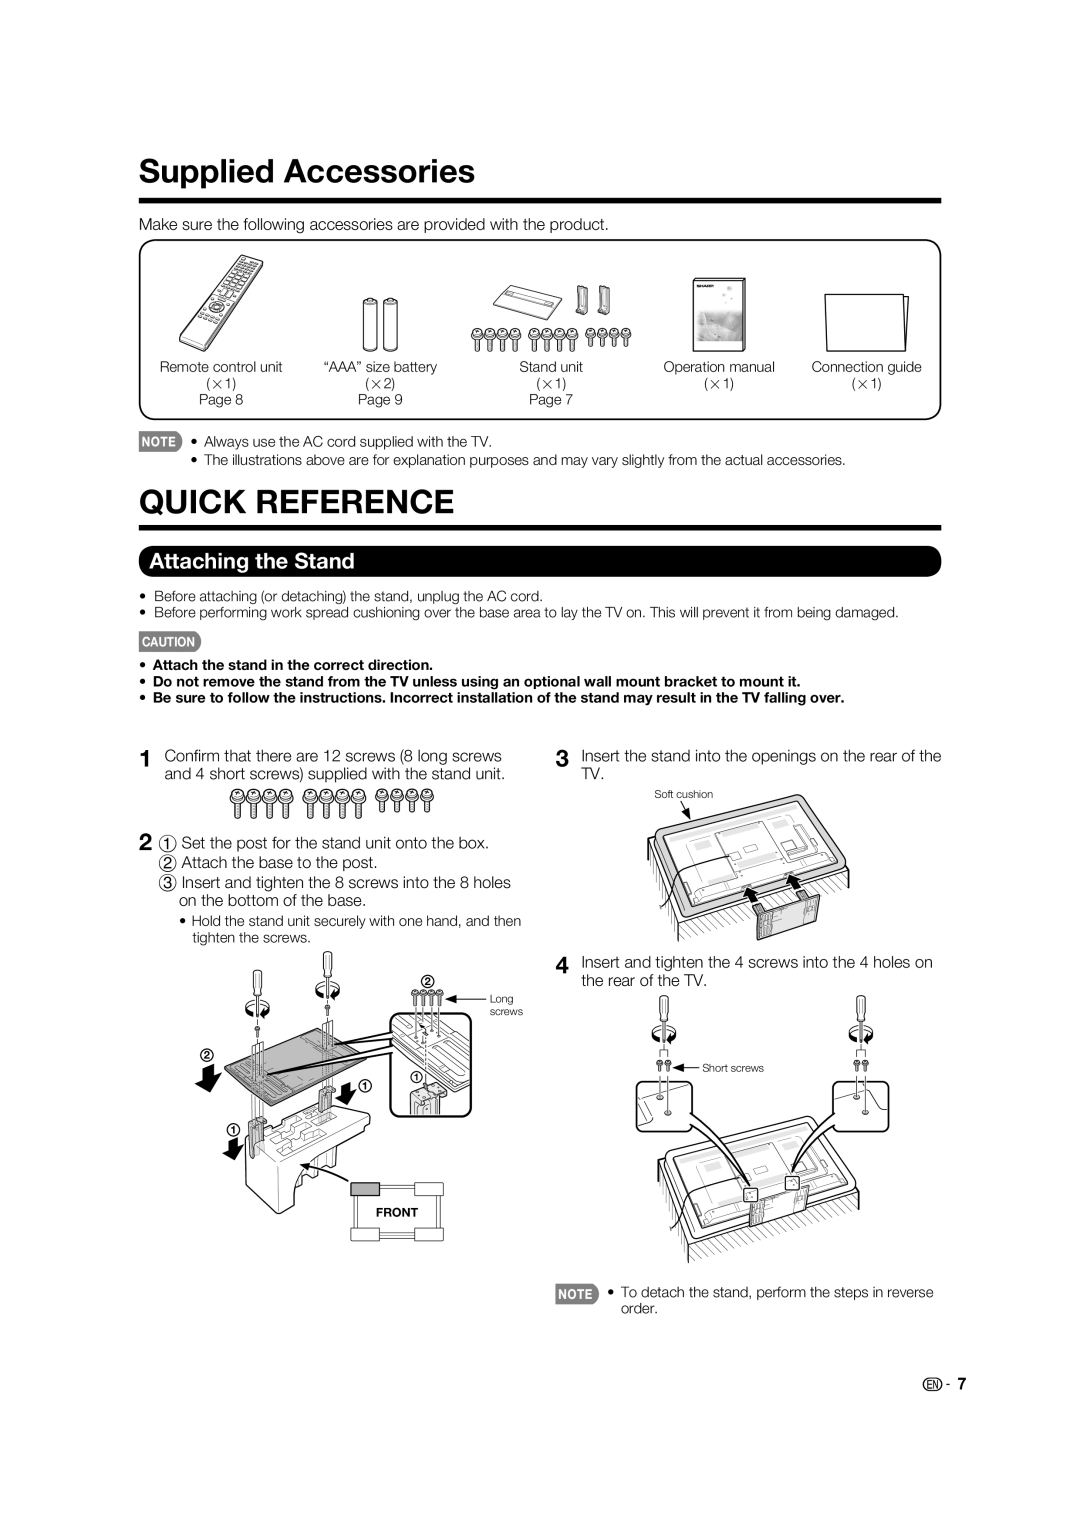 Sharp LC-60LE632U, LC-70LE732U operation manual Supplied Accessories, Quick Reference, Attaching the Stand 